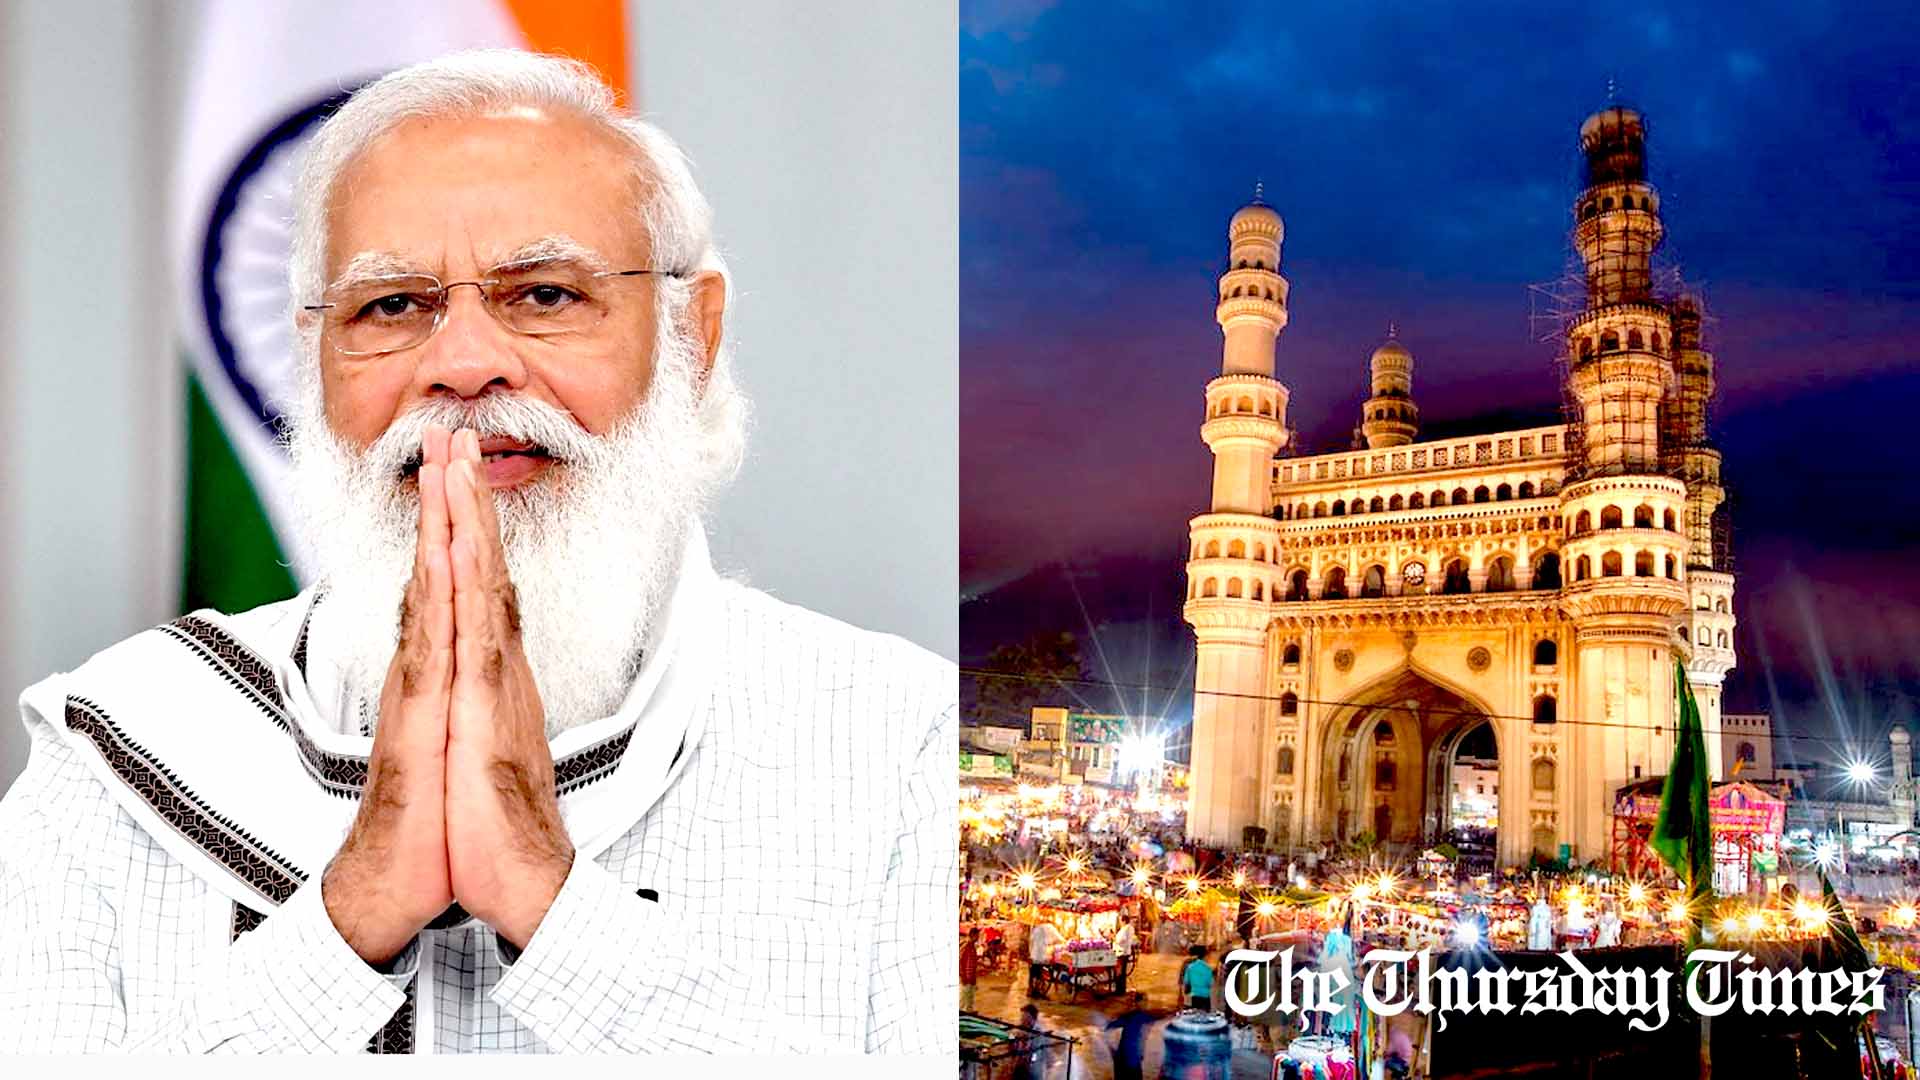 A combined file photo is shown of Indian prime minister Narendra Modi (L) and the Charminar in Indian Hyderabad. — FILE/THE THURSDAY TIMES